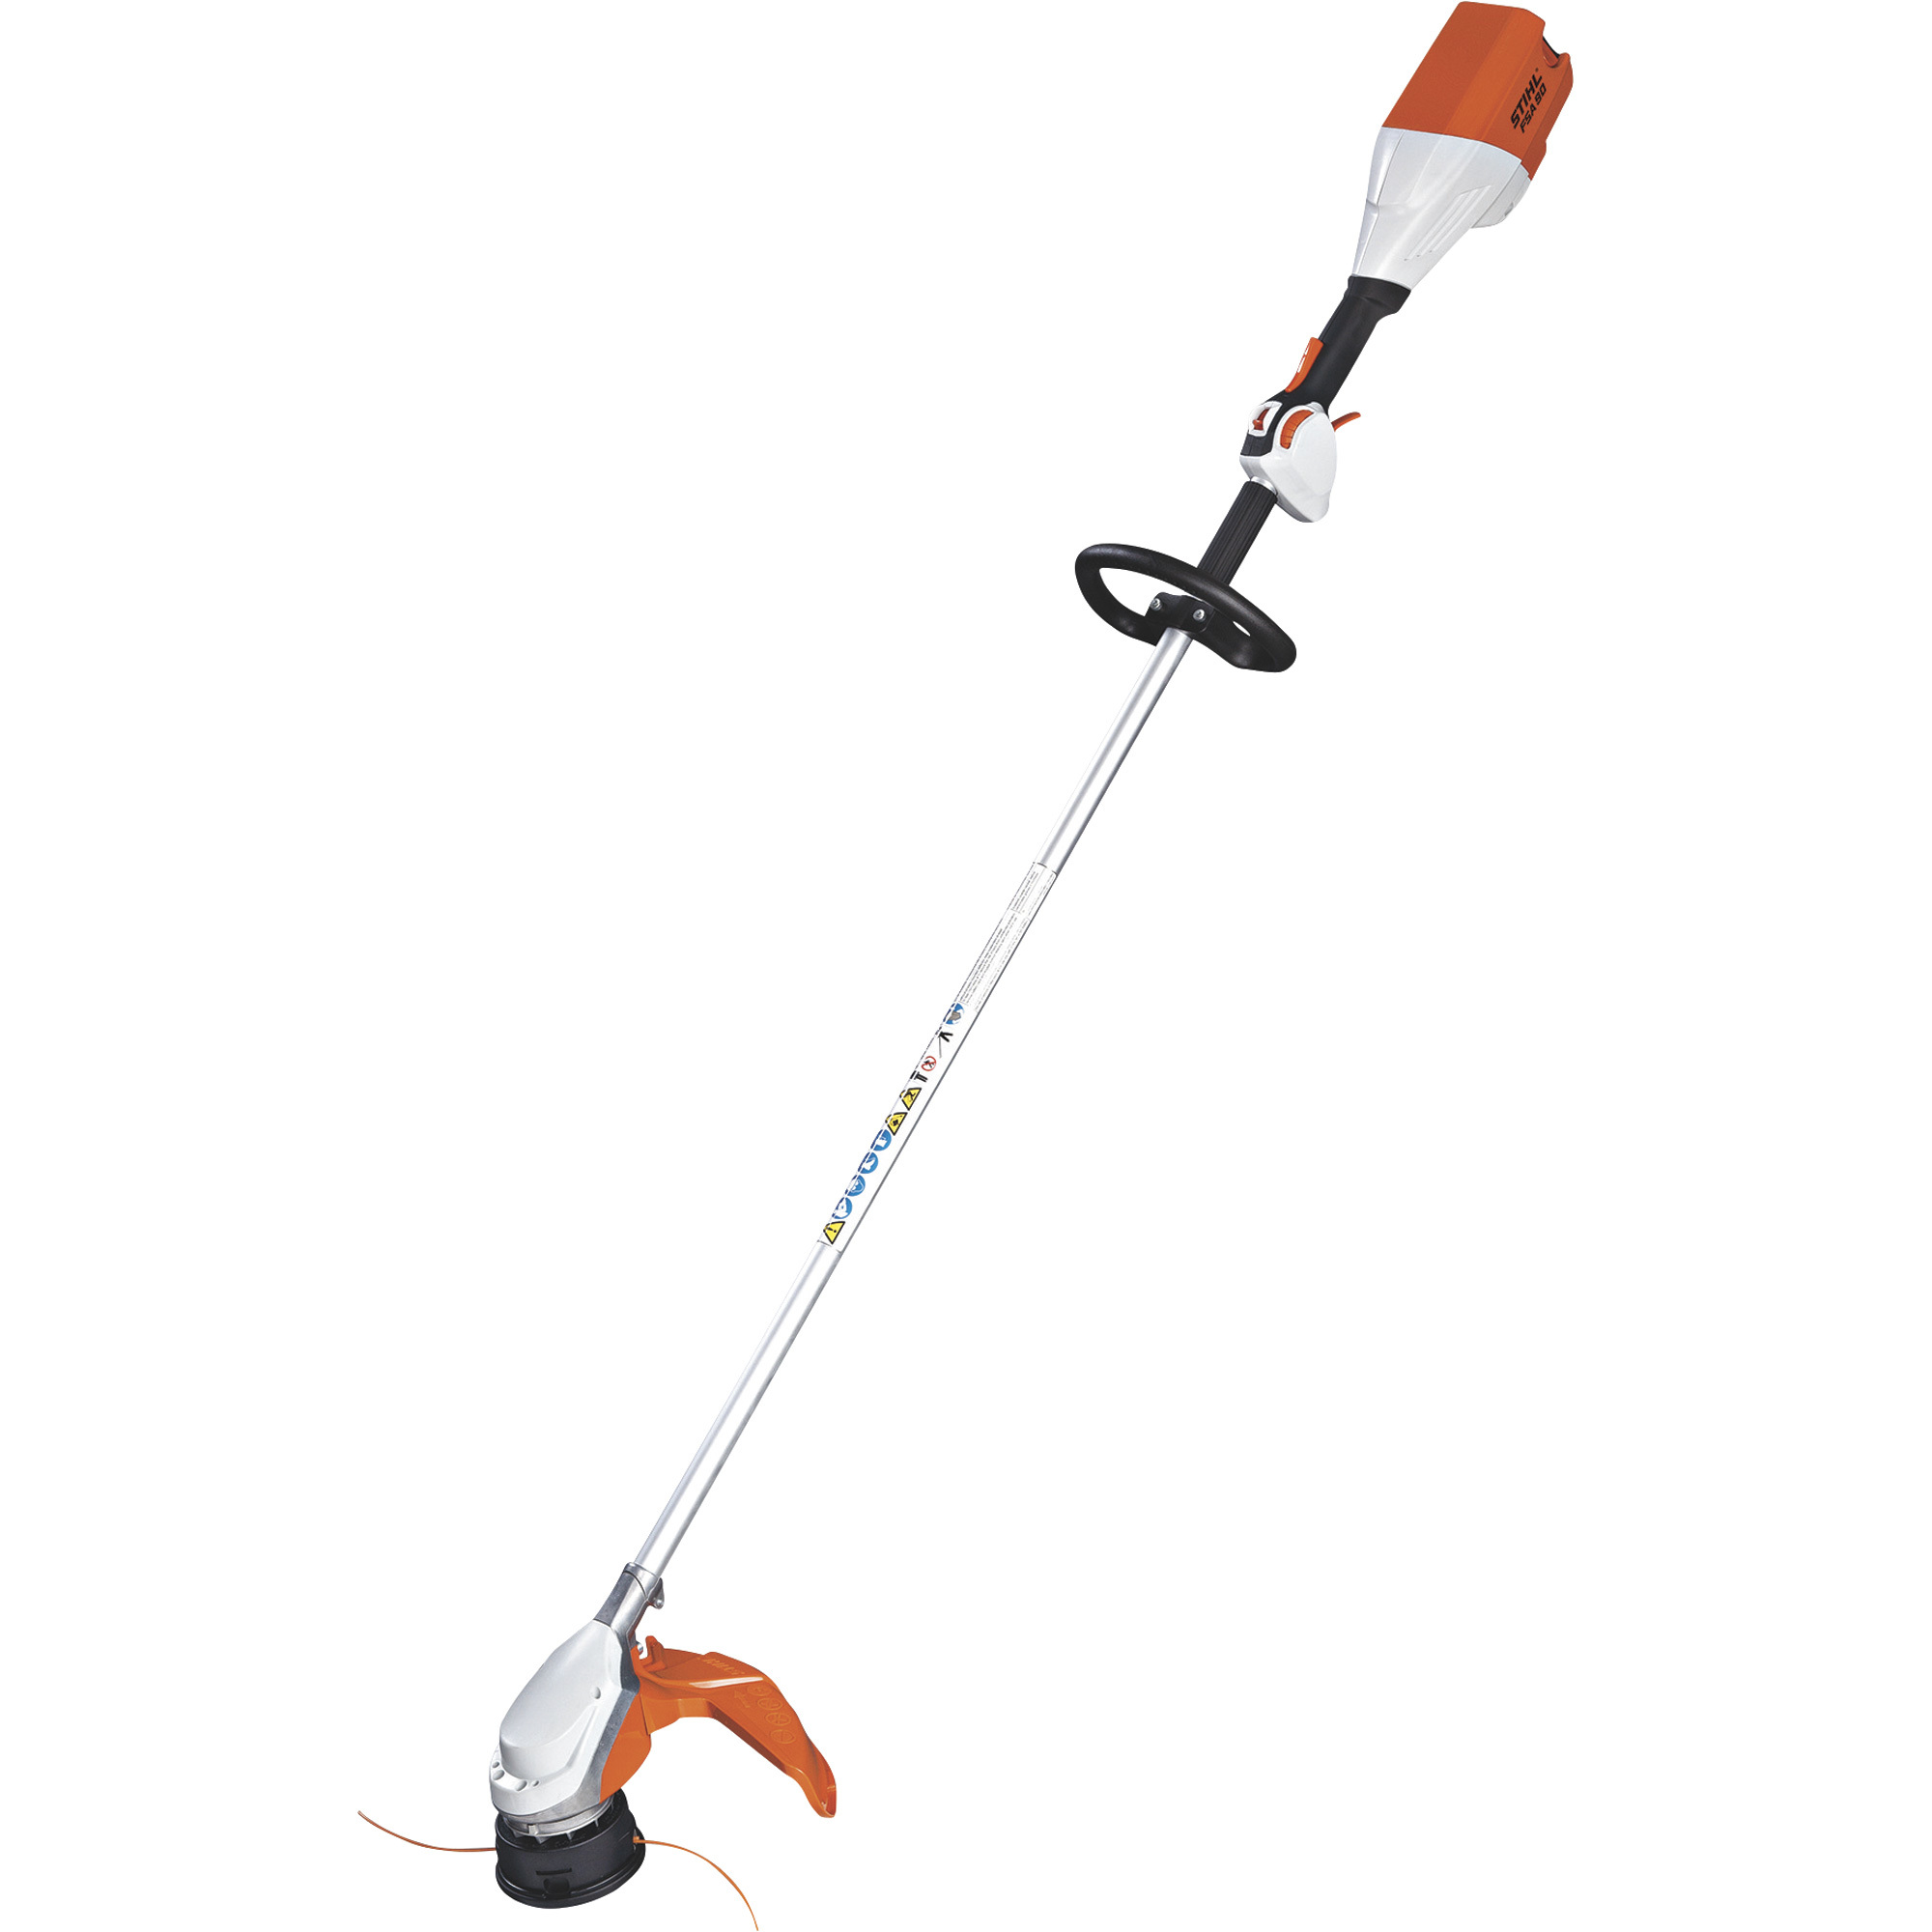 Stihl Battery-Operated 36 Volt Lithium-Ion Cordless Straight Shaft String Trimmer â 15Inch Cutting Width, Model FSA 90 R